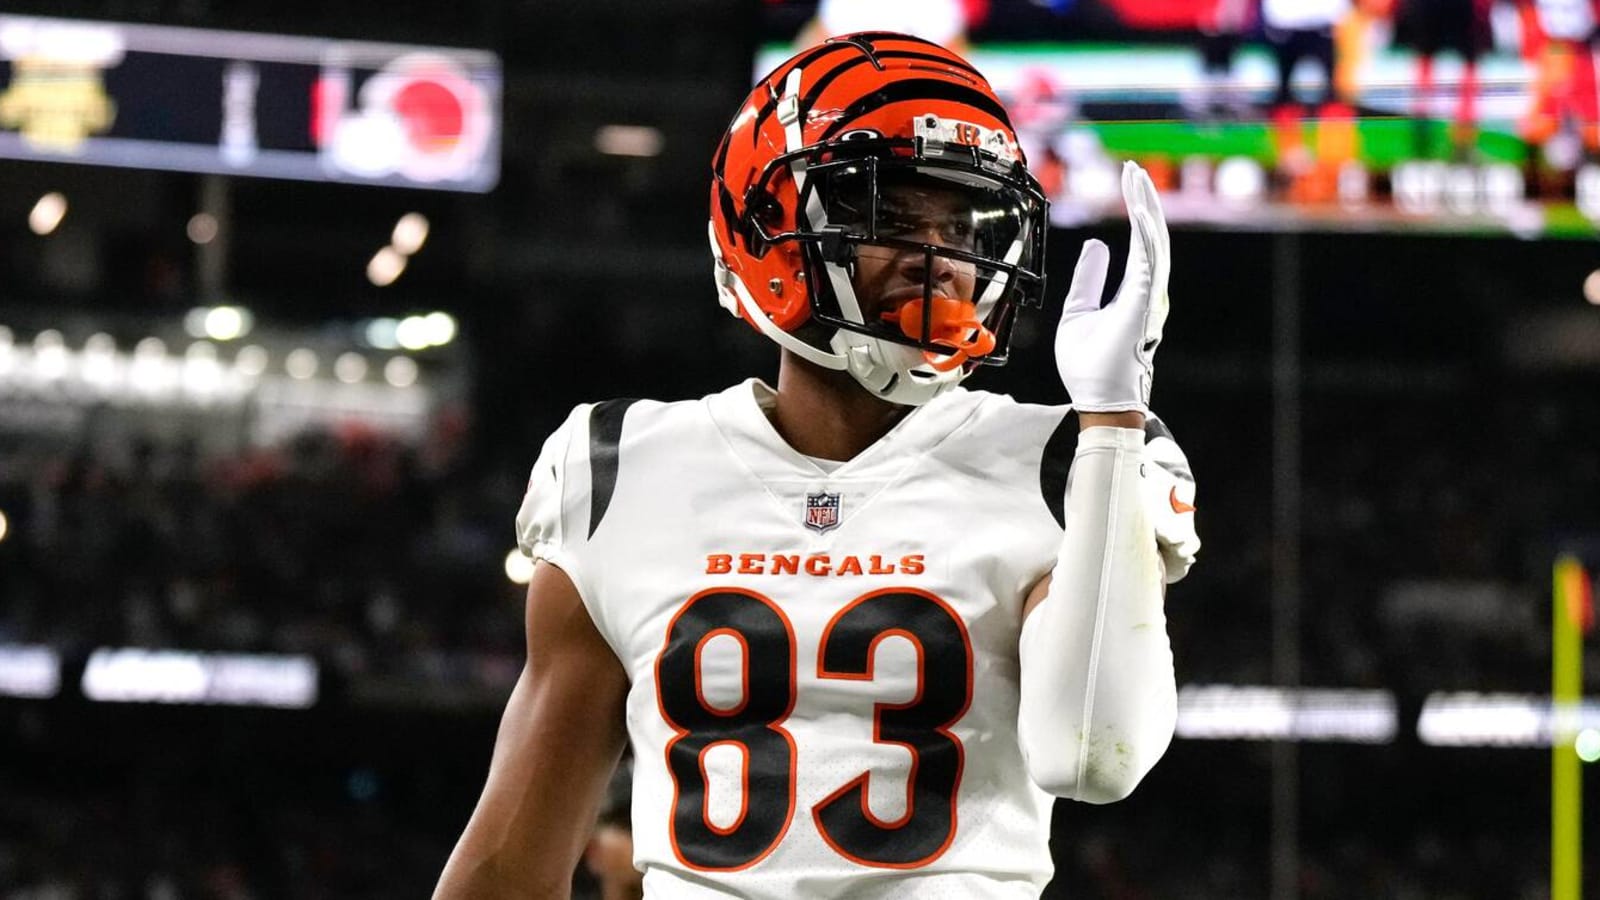 Bengals WR says team would have beaten Chiefs if healthy